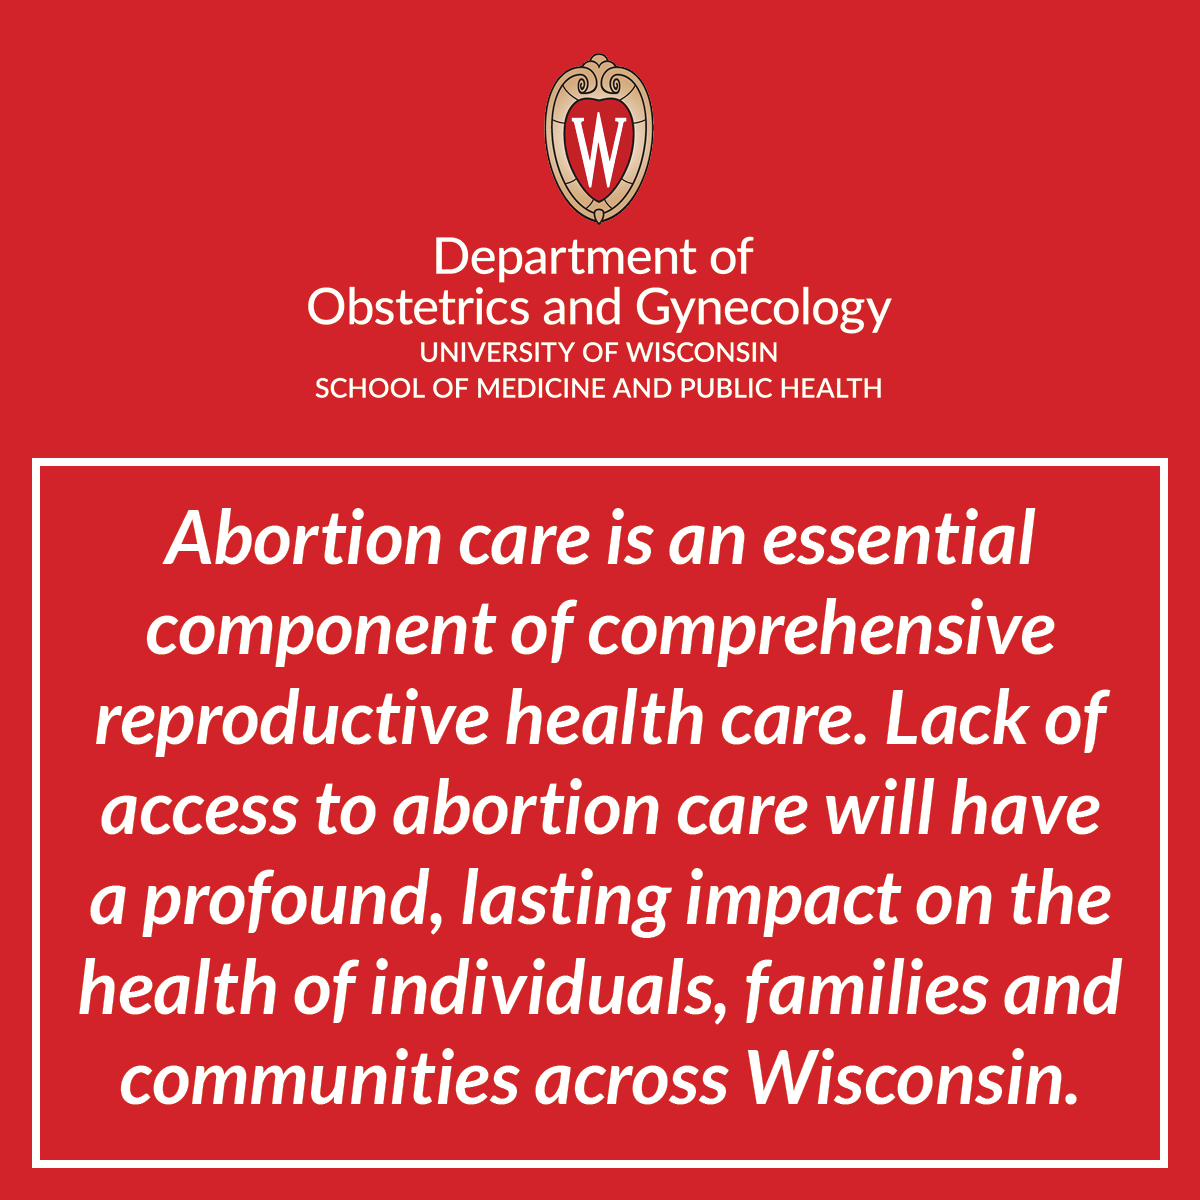  UW–Madison Department of Obstetrics and Gynecology response to U.S. Supreme Court decision